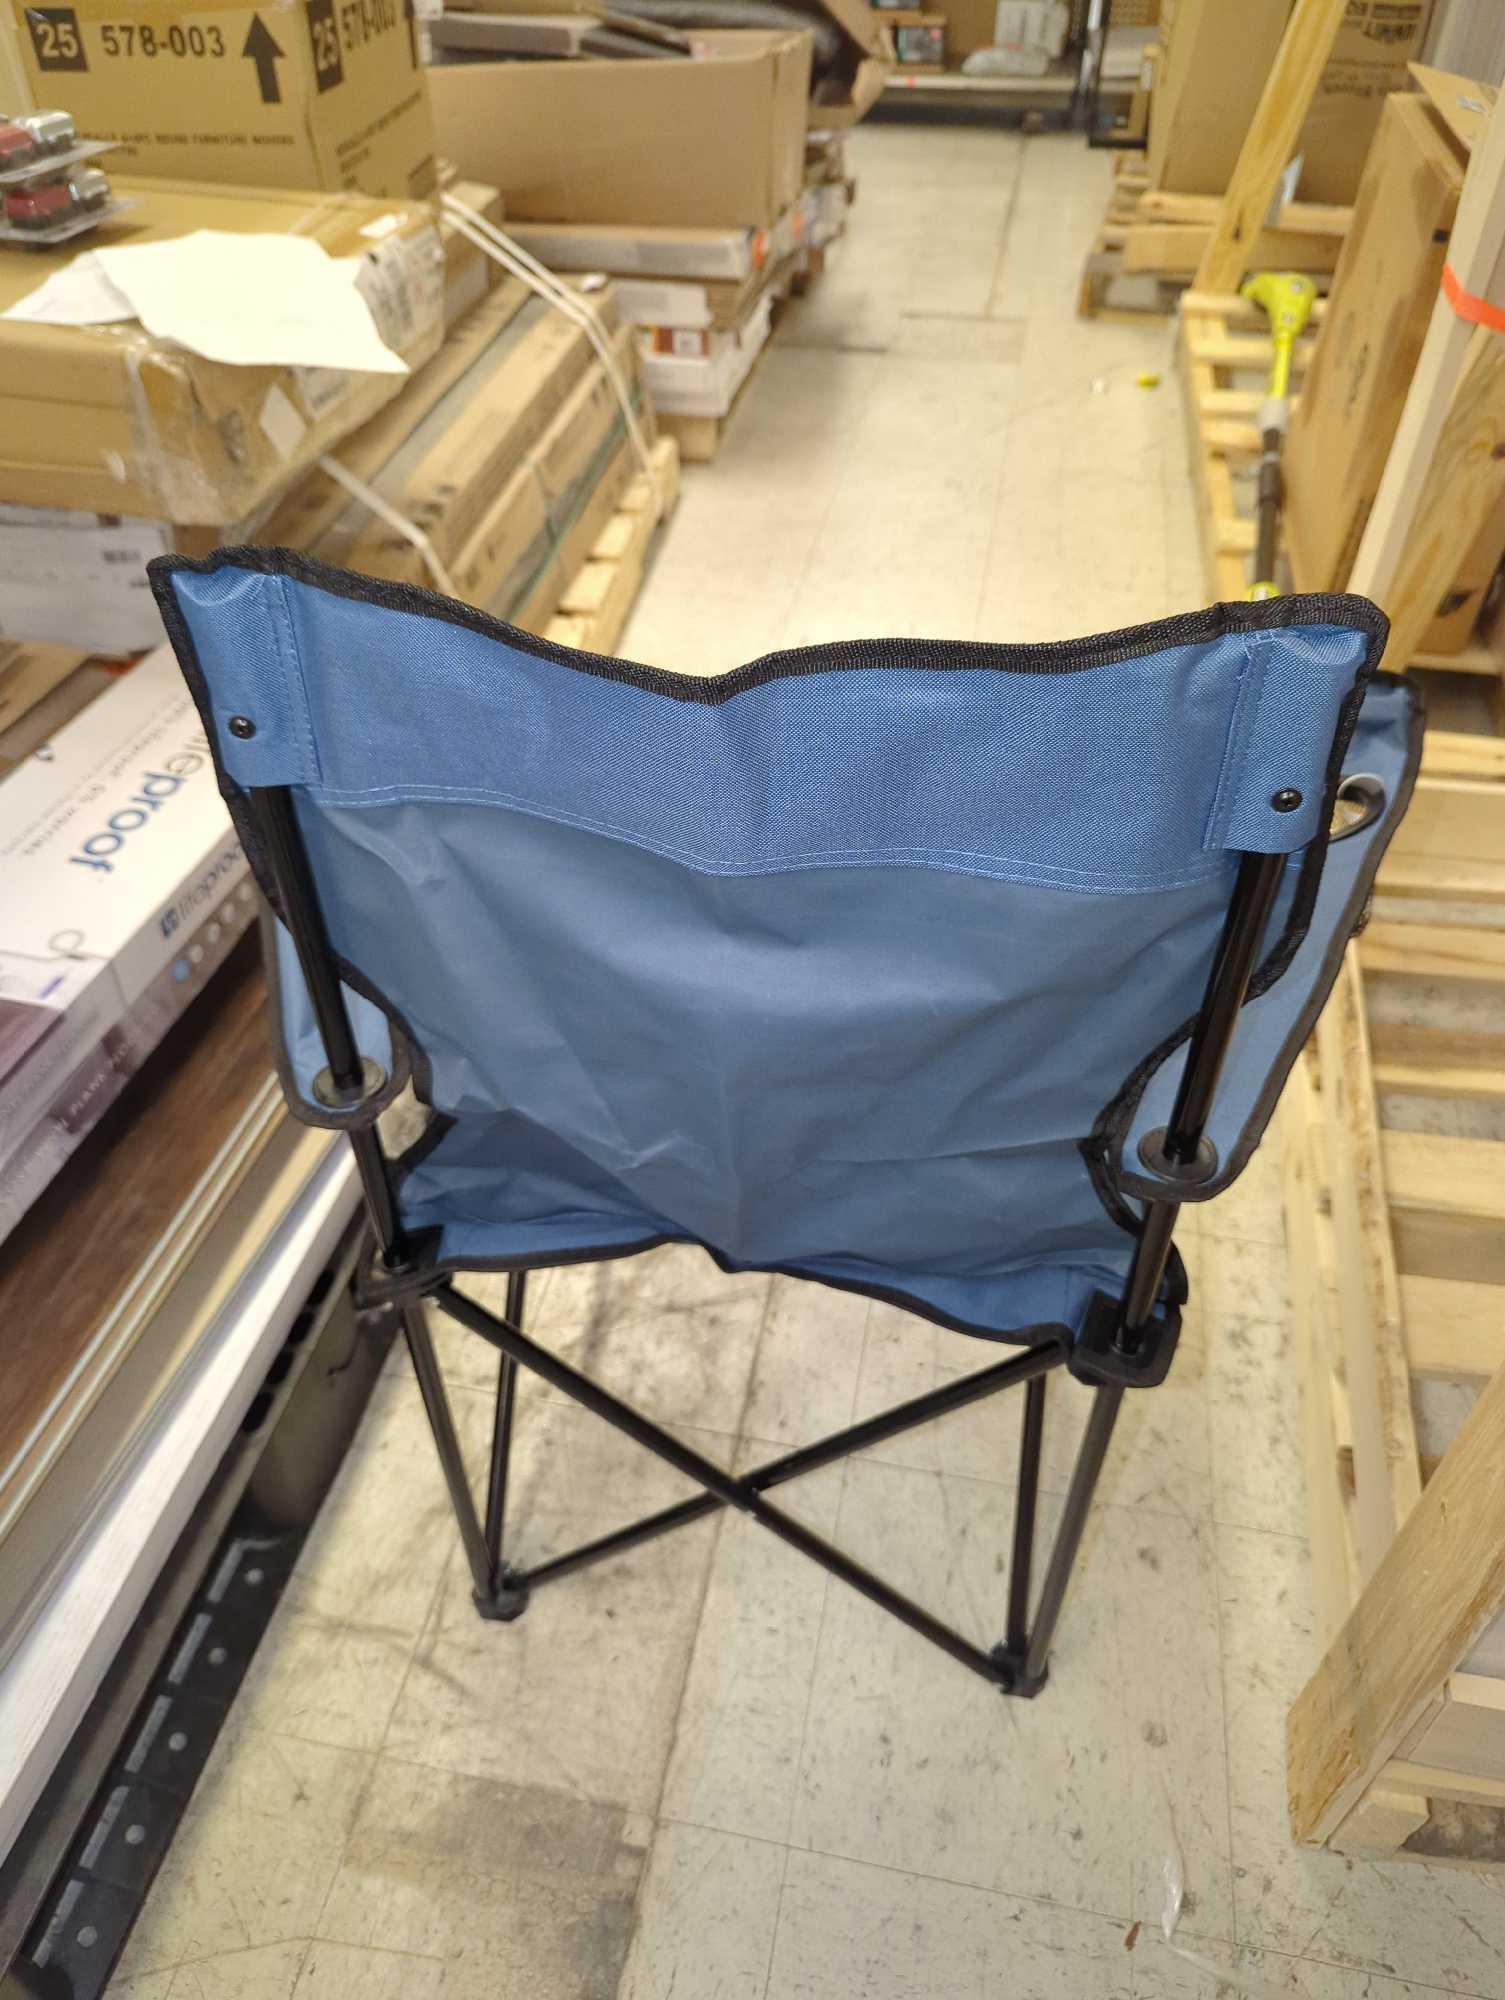 Folding Bag Chair with Cupholder in Blue, Retail Price $10, Appears to be New, What You See in the